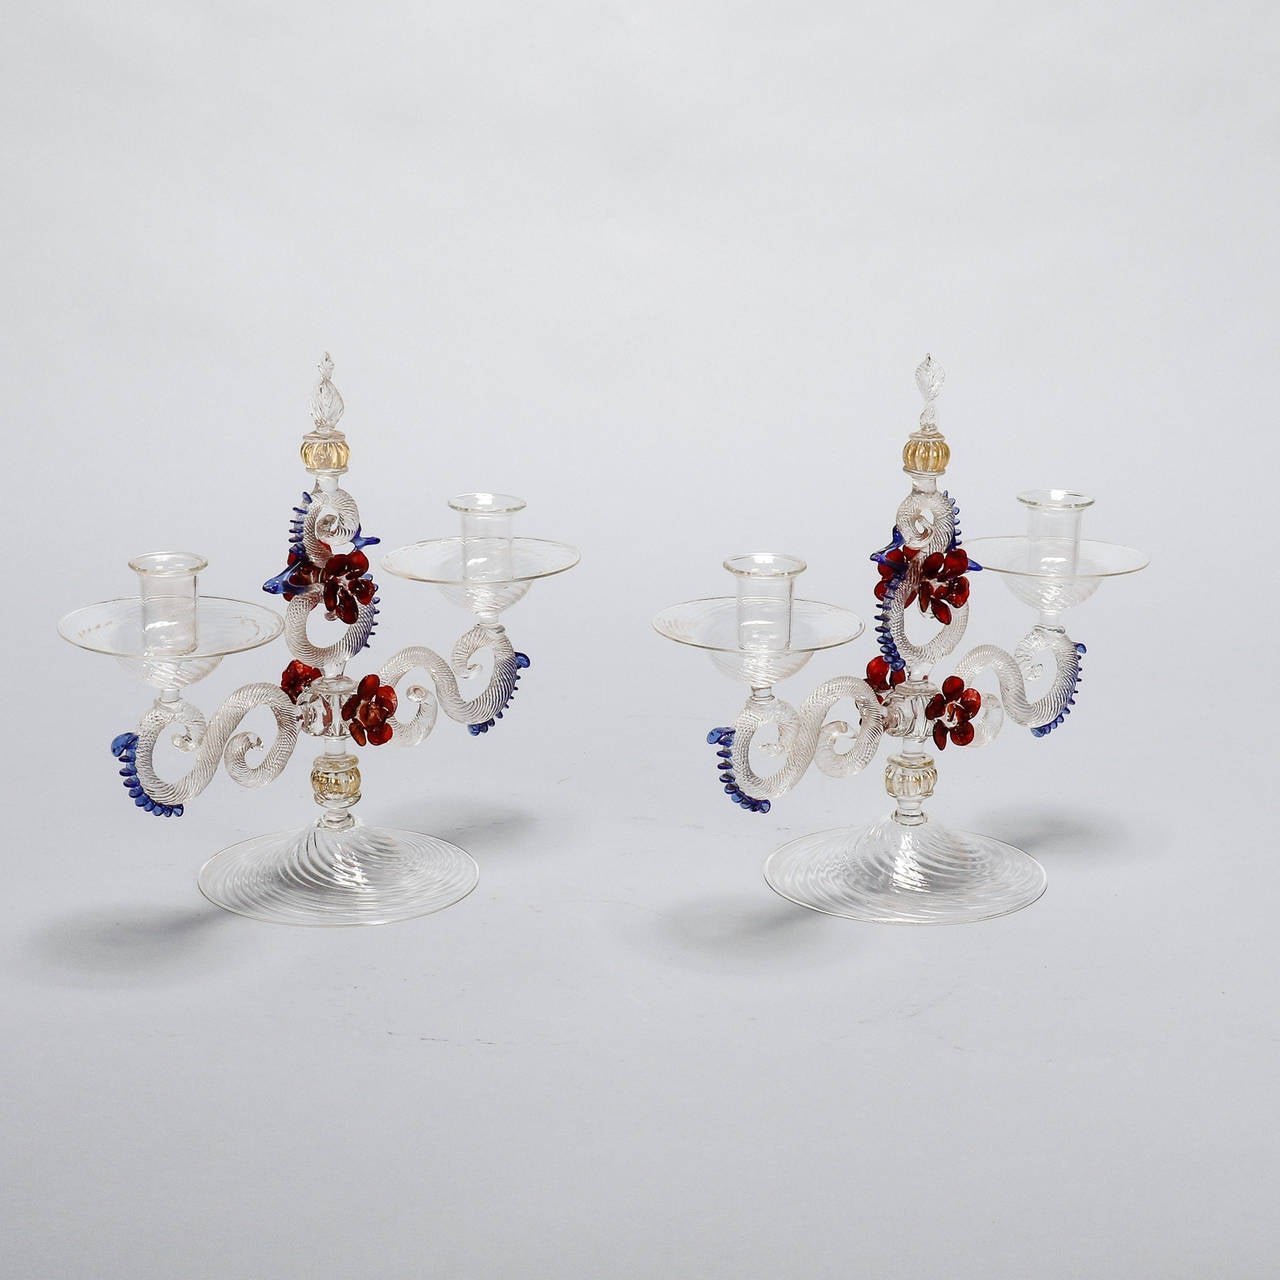 Pair of hand blown Venetian glass candlesticks with two candle cups each. Base is clear glass embellished with red flowers and blue accents. Sold and priced as a pair, circa 1900.